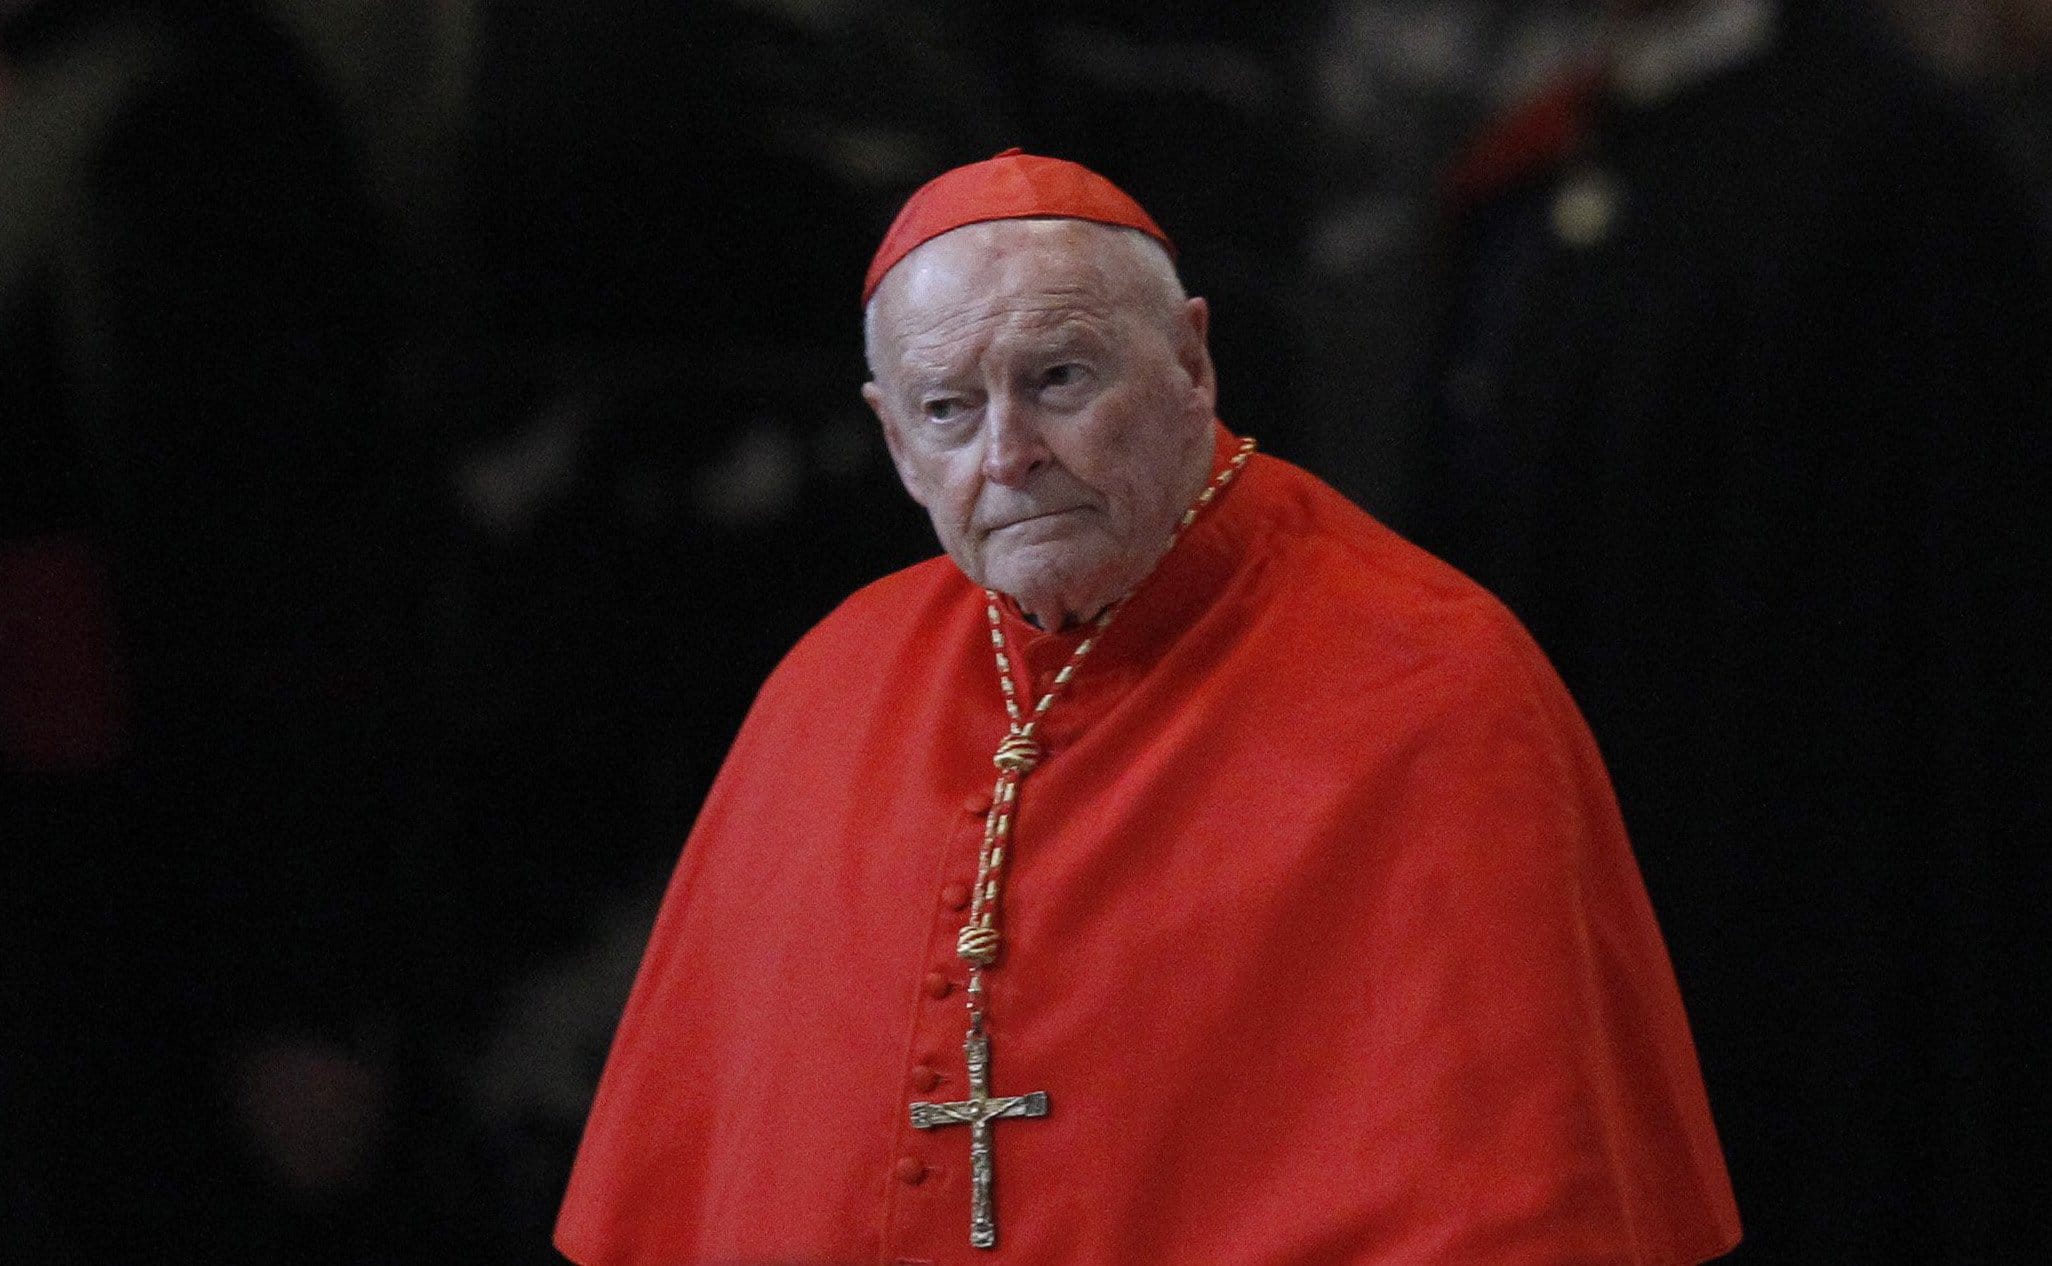 Then-Cardinal Theodore E. McCarrick arrives for Ash Wednesday Mass in St. Peter's Basilica at the Vatican in this Feb. 13, 2013 file photo. Prosecutors are challenging the medical report claiming former cardinal Theodore McCarrick is not competent to stand trial on charges he sexually abused a teen in the 1970s. (CNS photo/Paul Haring)